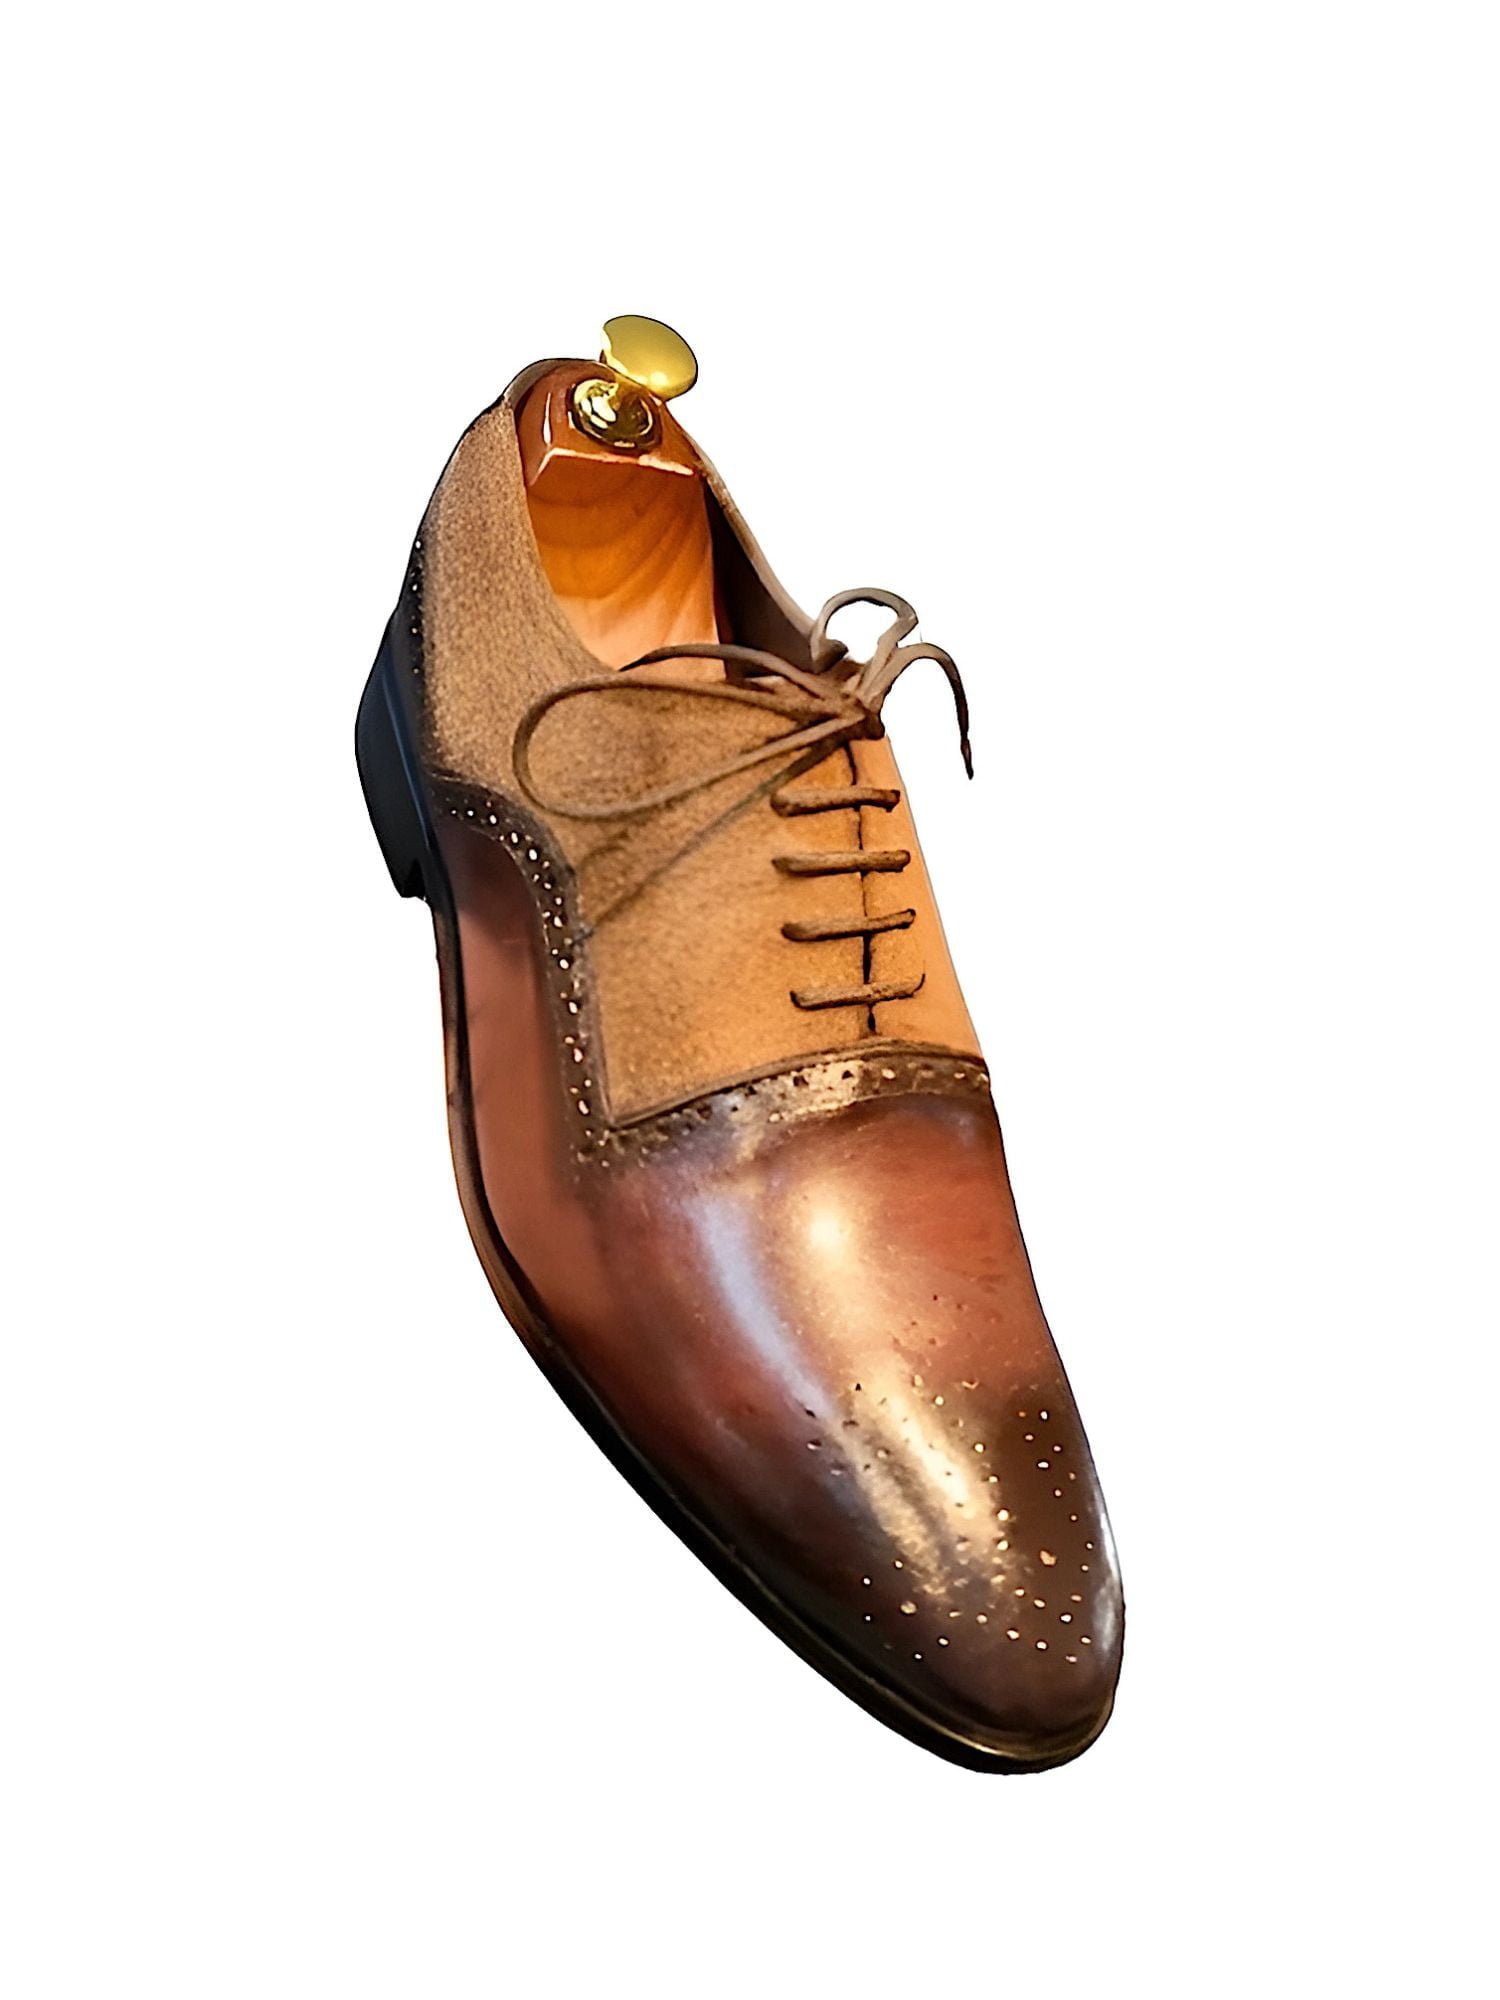 Men’s Leather Two Tone Brogue Shoes